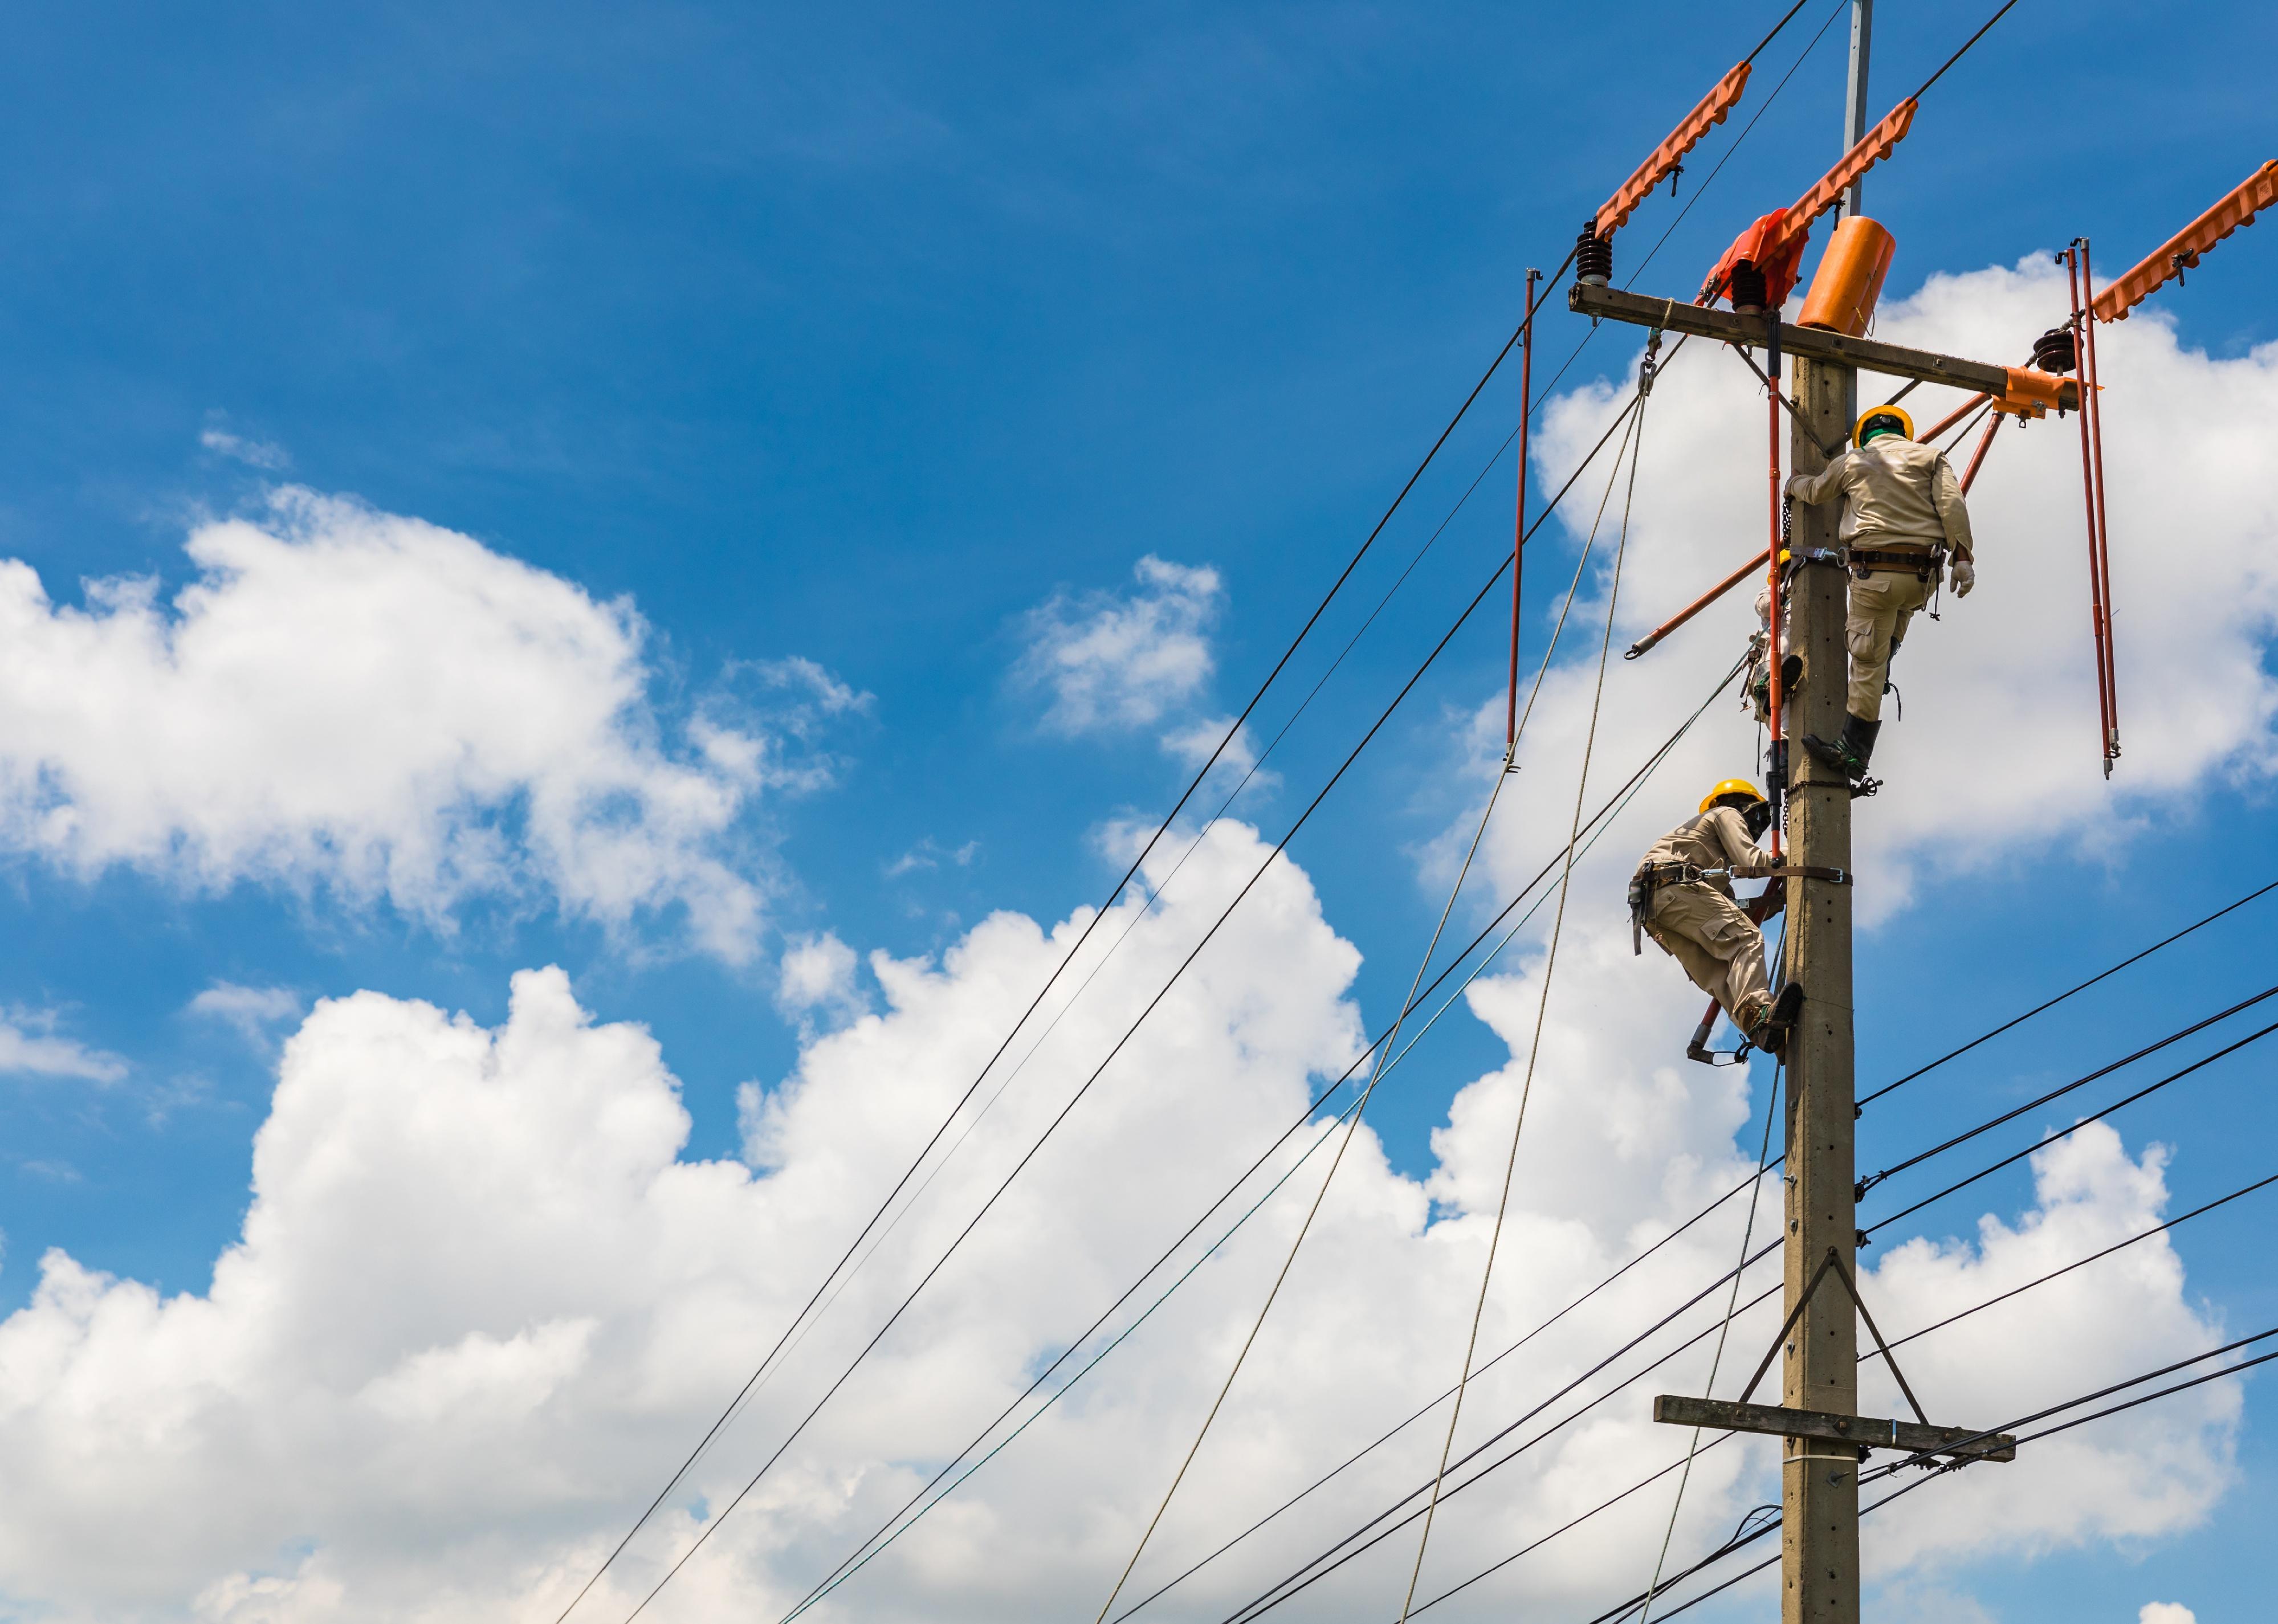 Electricians work on a power line up high.